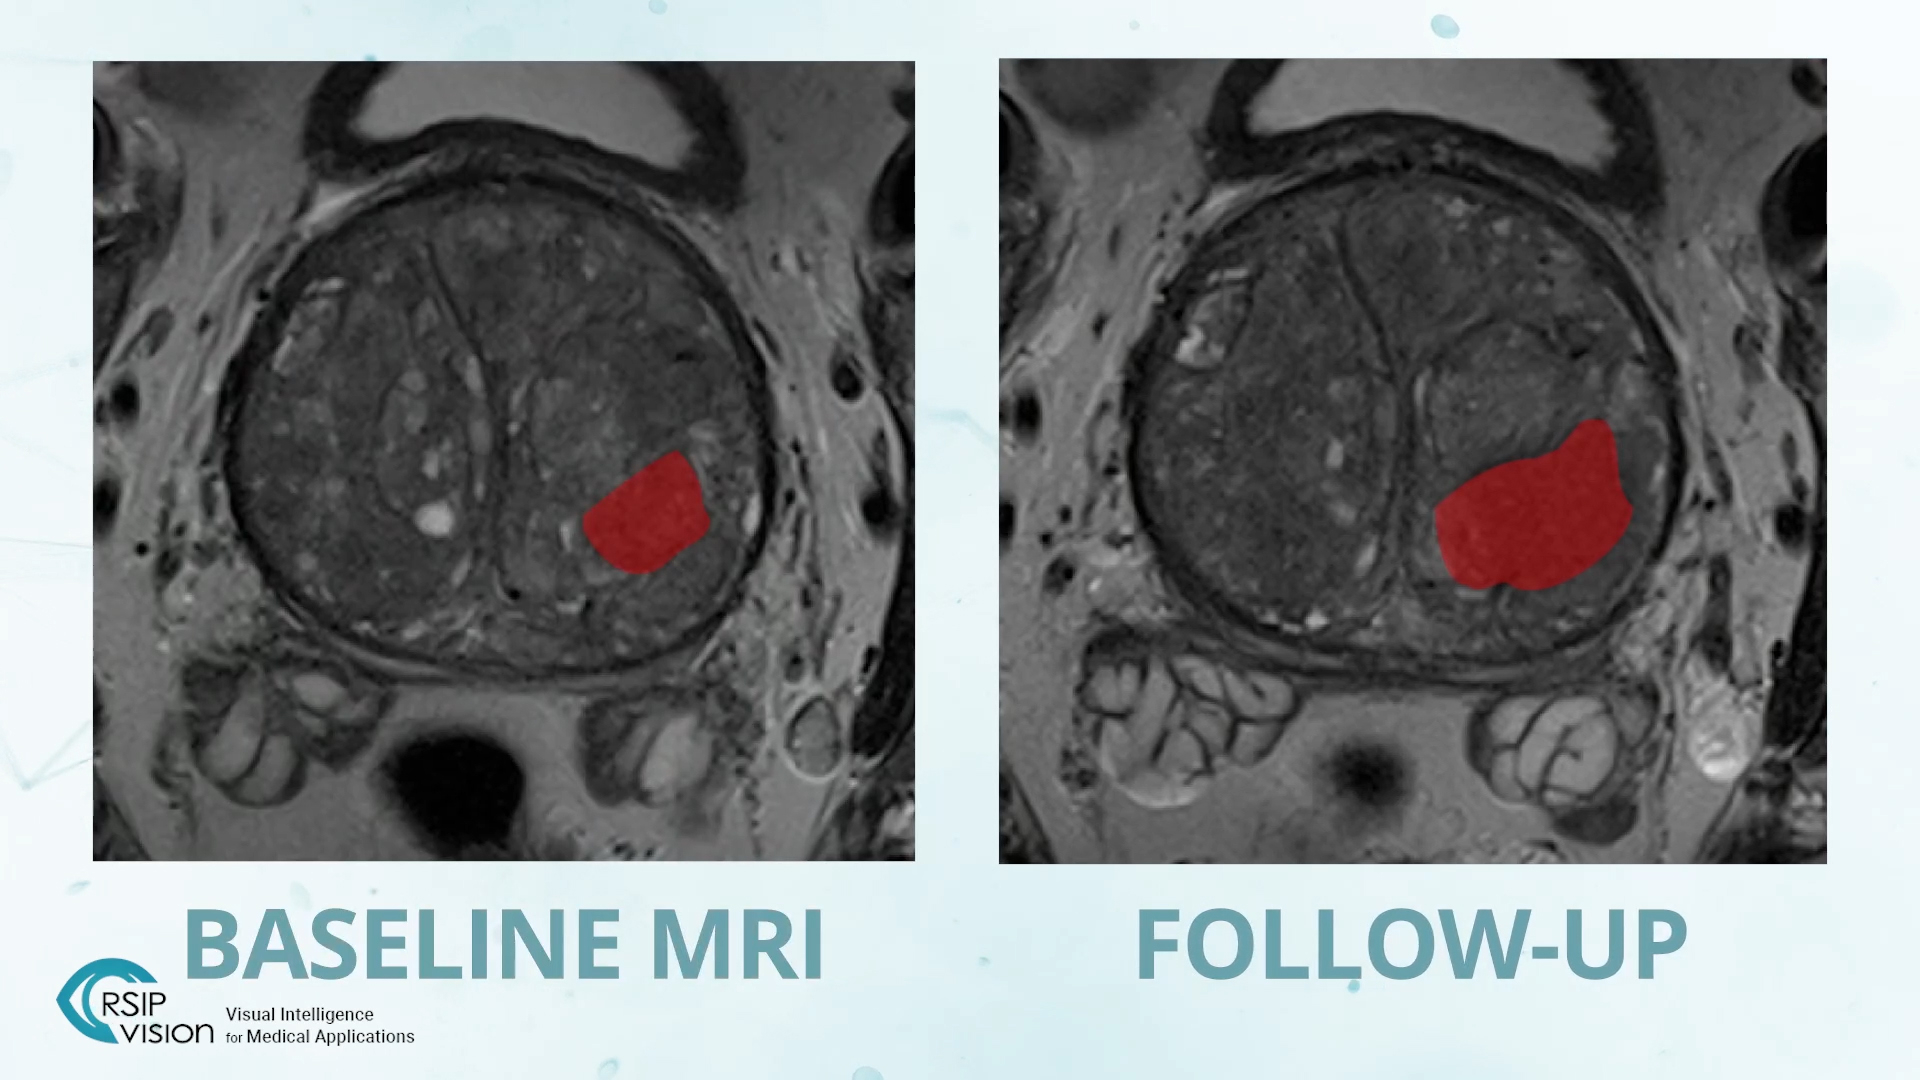 New AI Tool for Prostate MRI Analysis from RSIP Vision performs segmentation of the prostate, its sub-sections, and lesions.